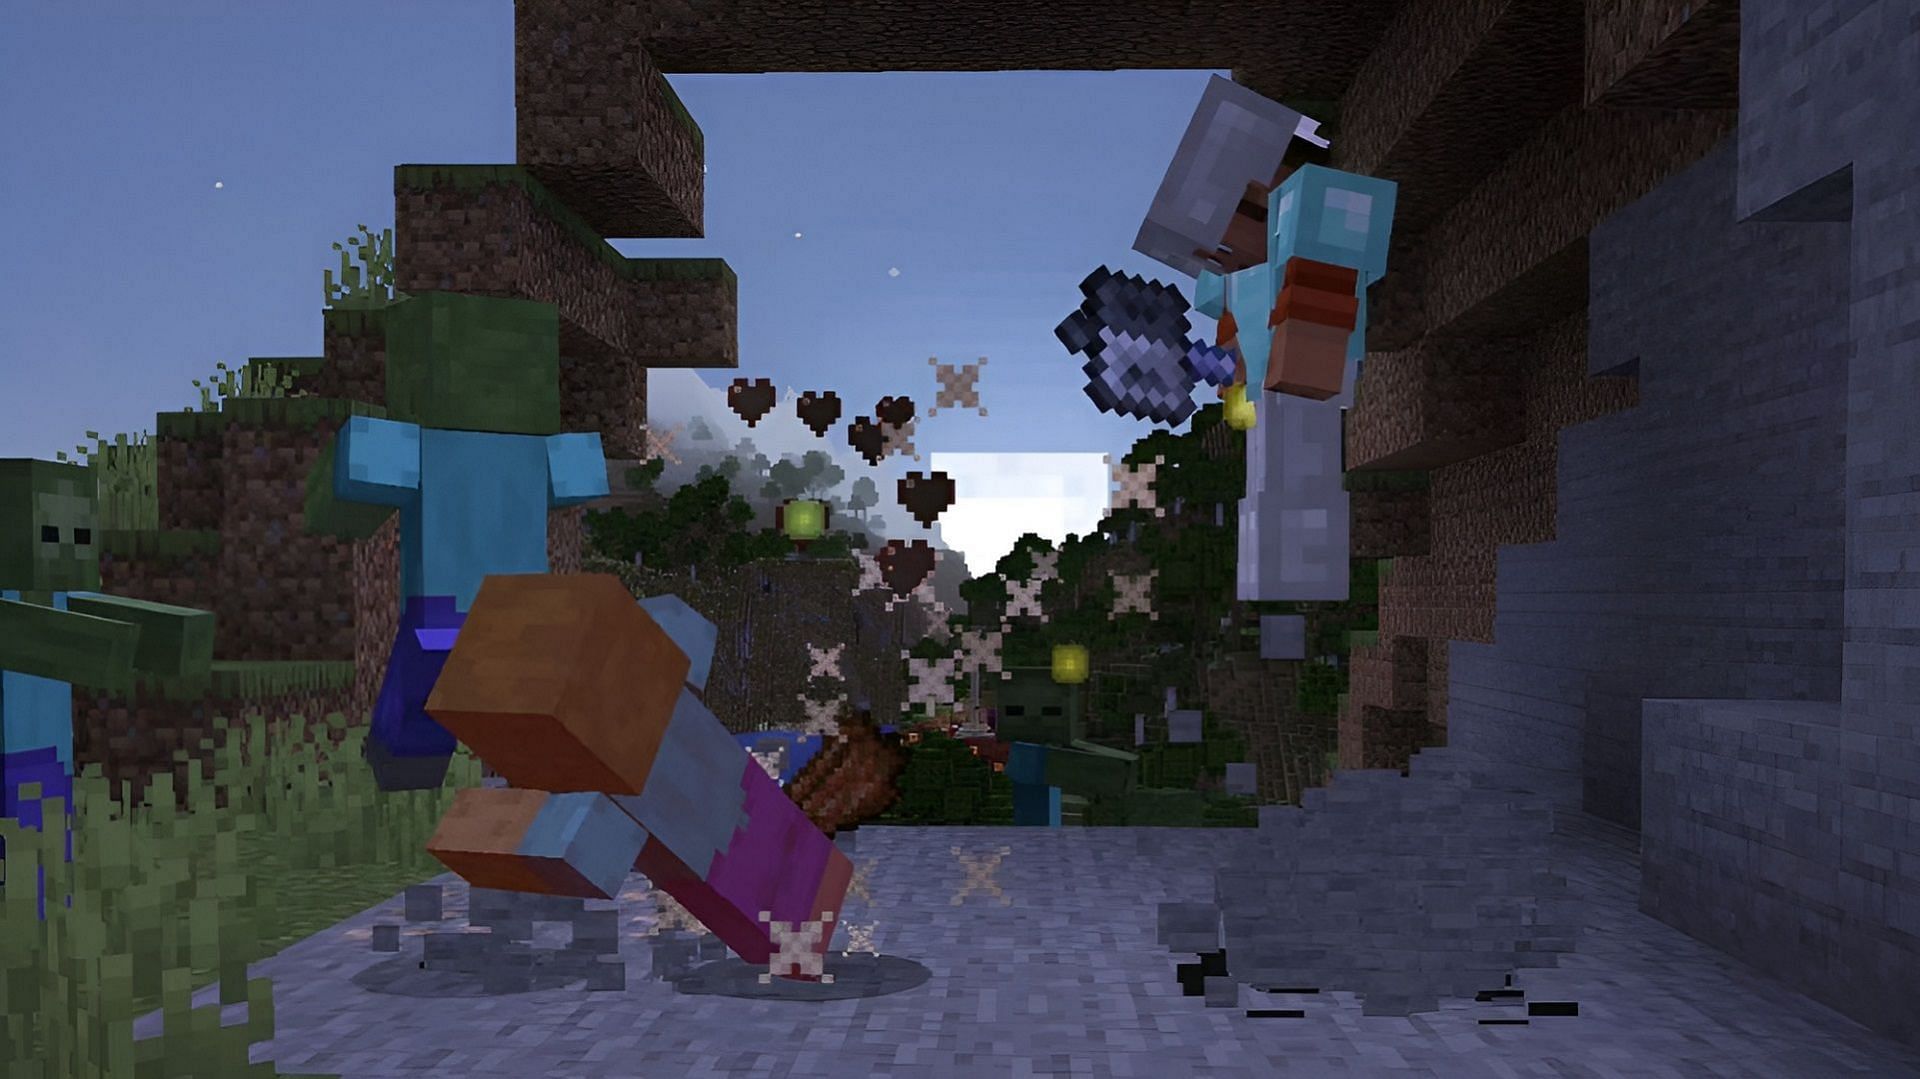 Minecraft maces have a devastating smash attack, but they require practice to use effectively (Image via Mojang)